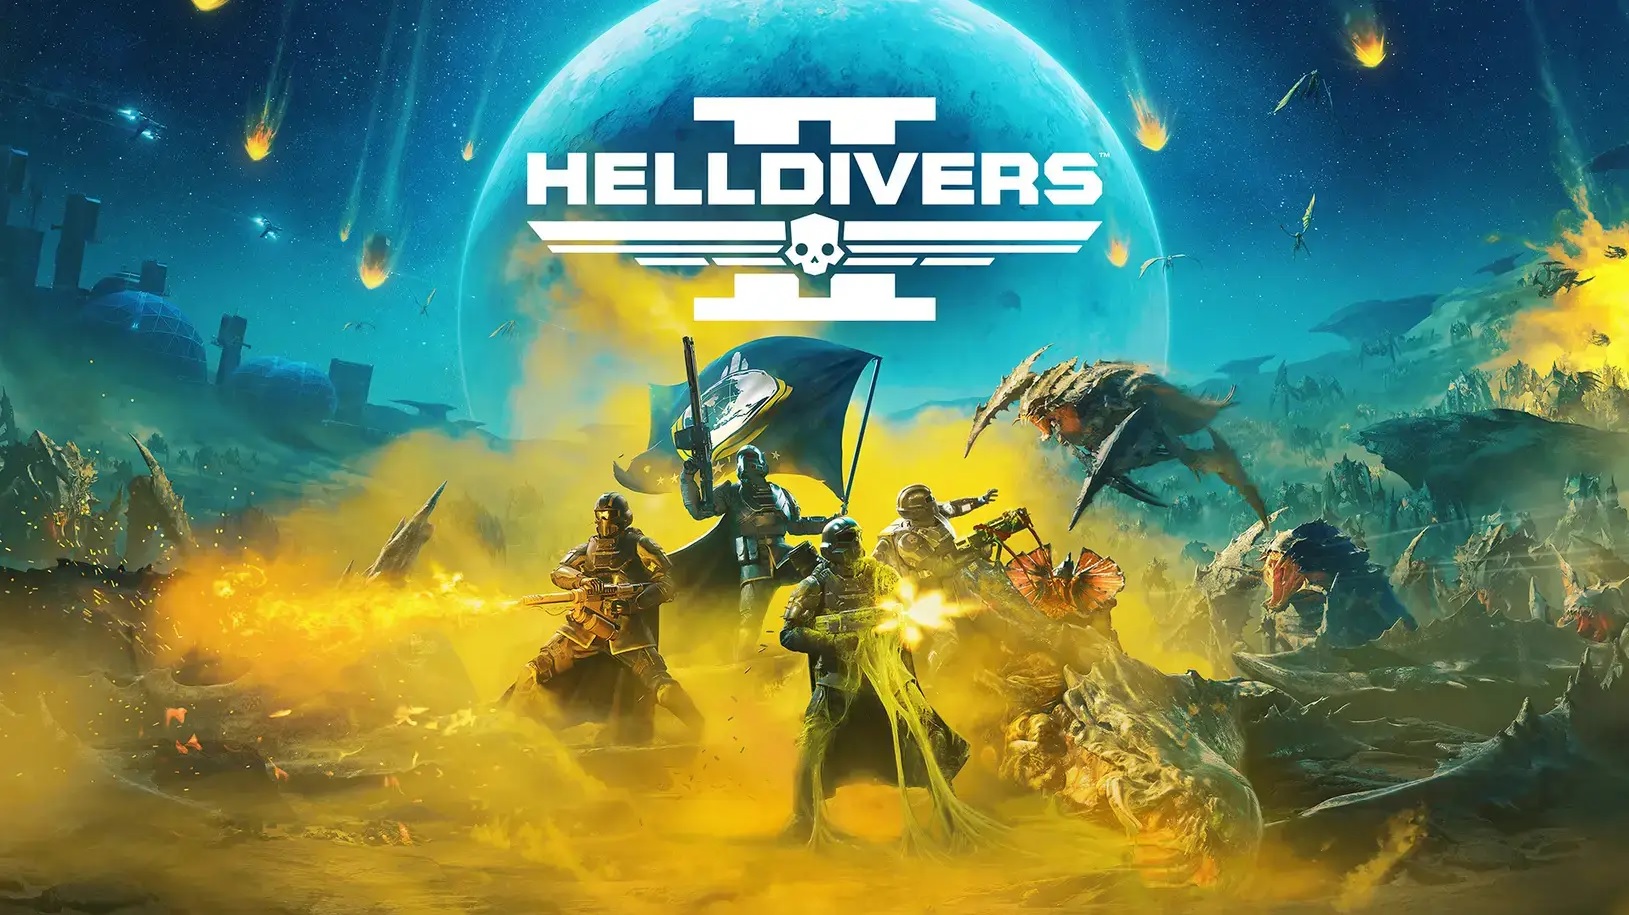 Helldivers 2 is good old fashioned co-op fun